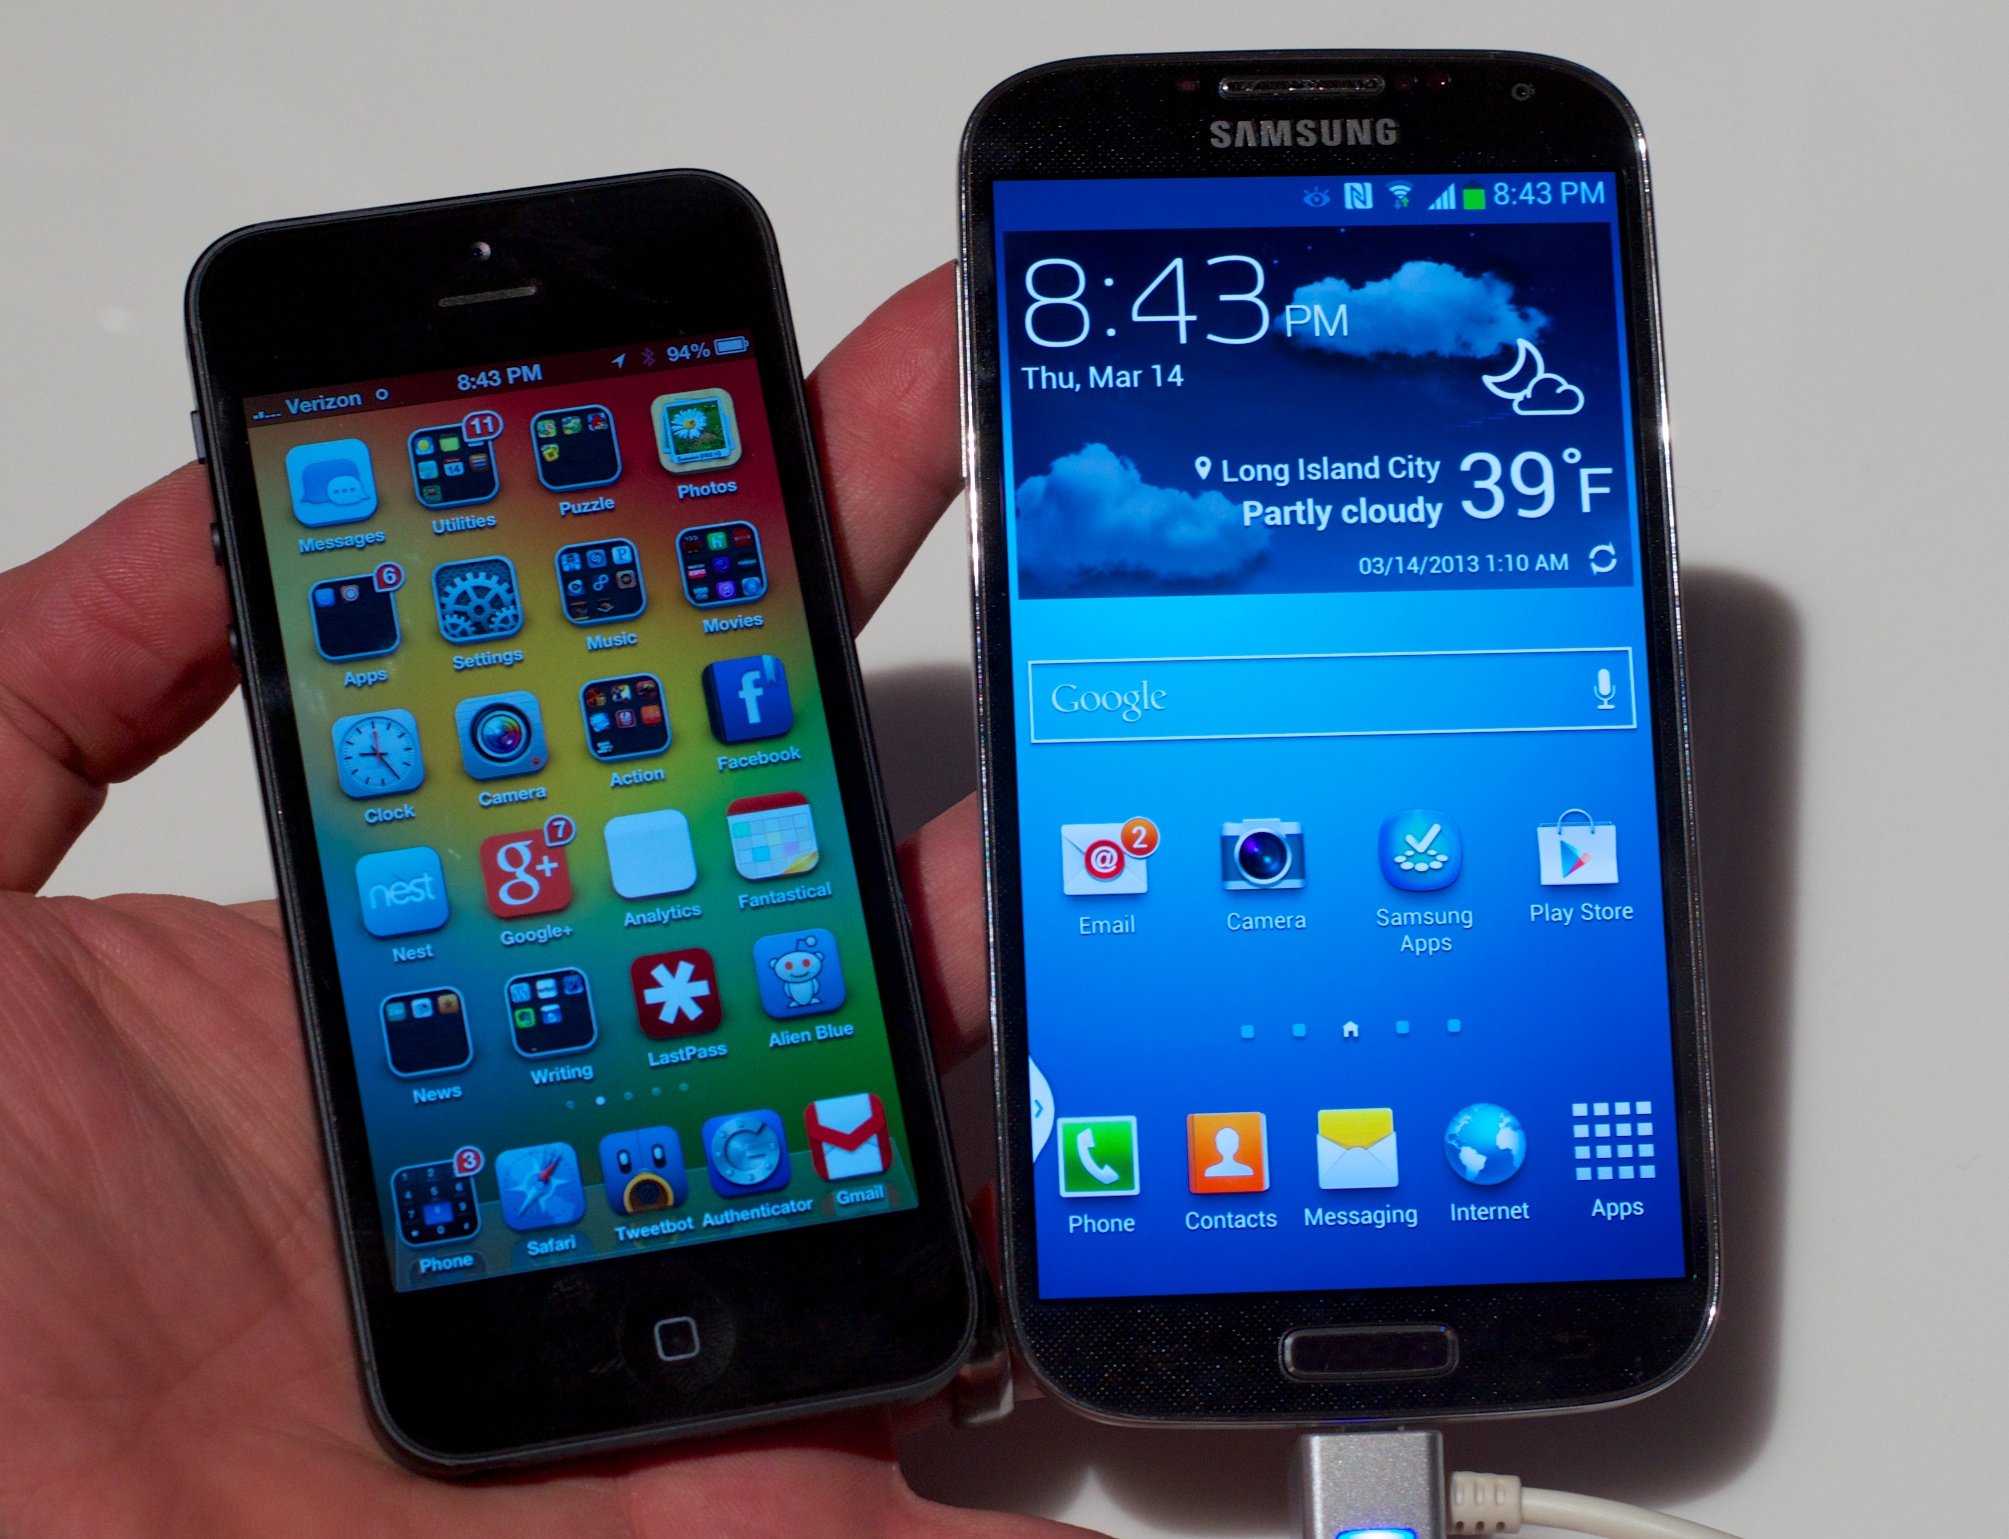 Samsung Galaxy S4 vs. iPhone 5 display size and quality.